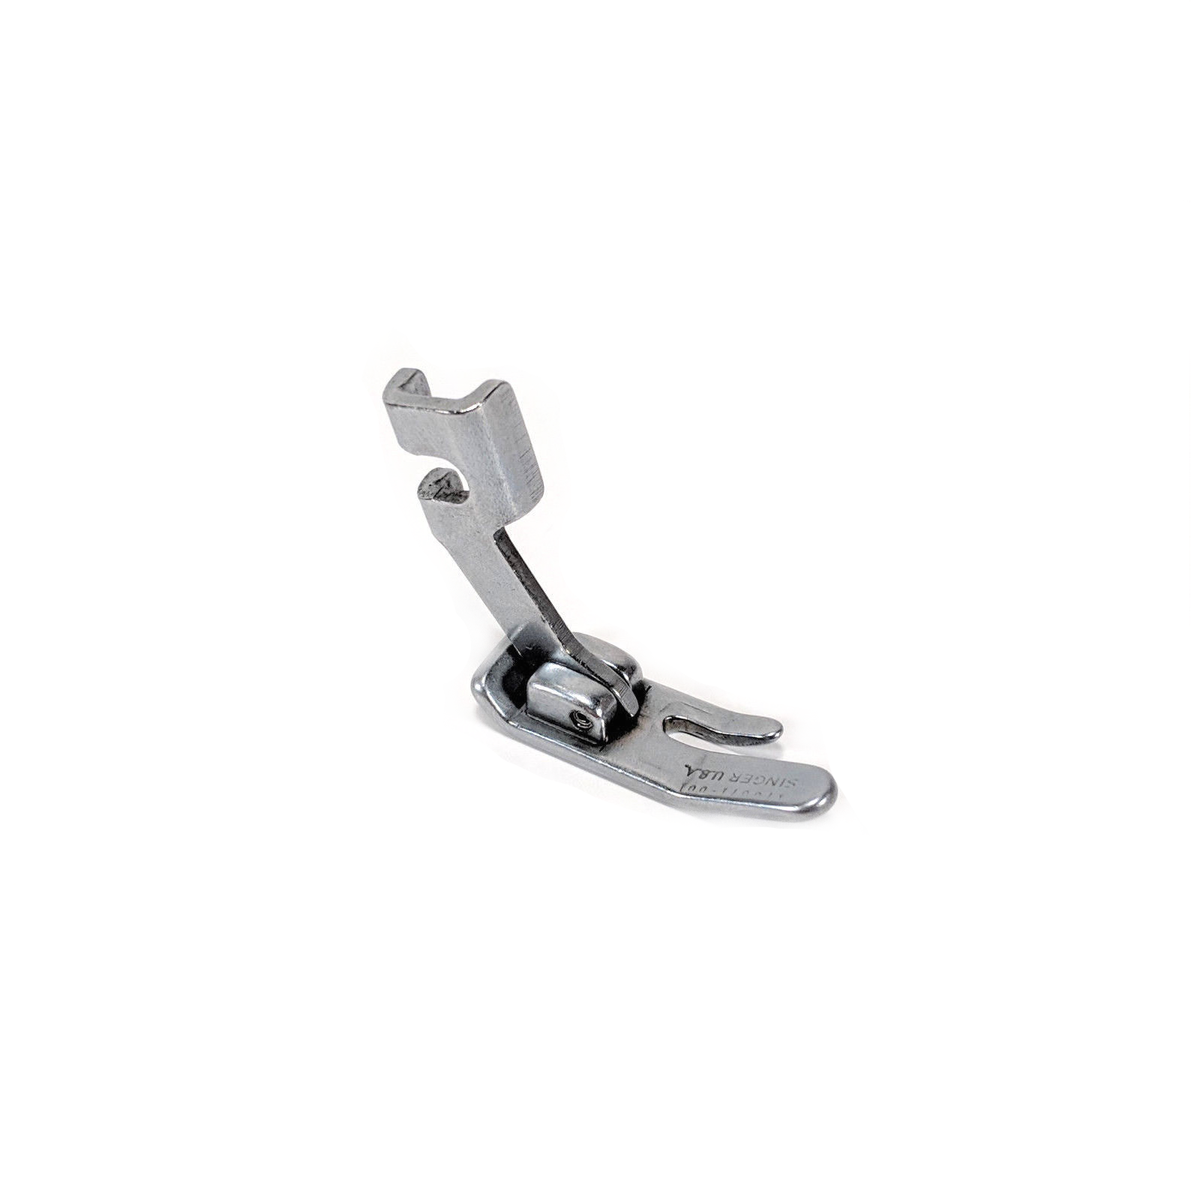 DreamStitch DREAMSTITCH P55607 Low Shank 1/8 inch Rolled Hemmer Presser  Foot for Singer Sewing Machine P55607